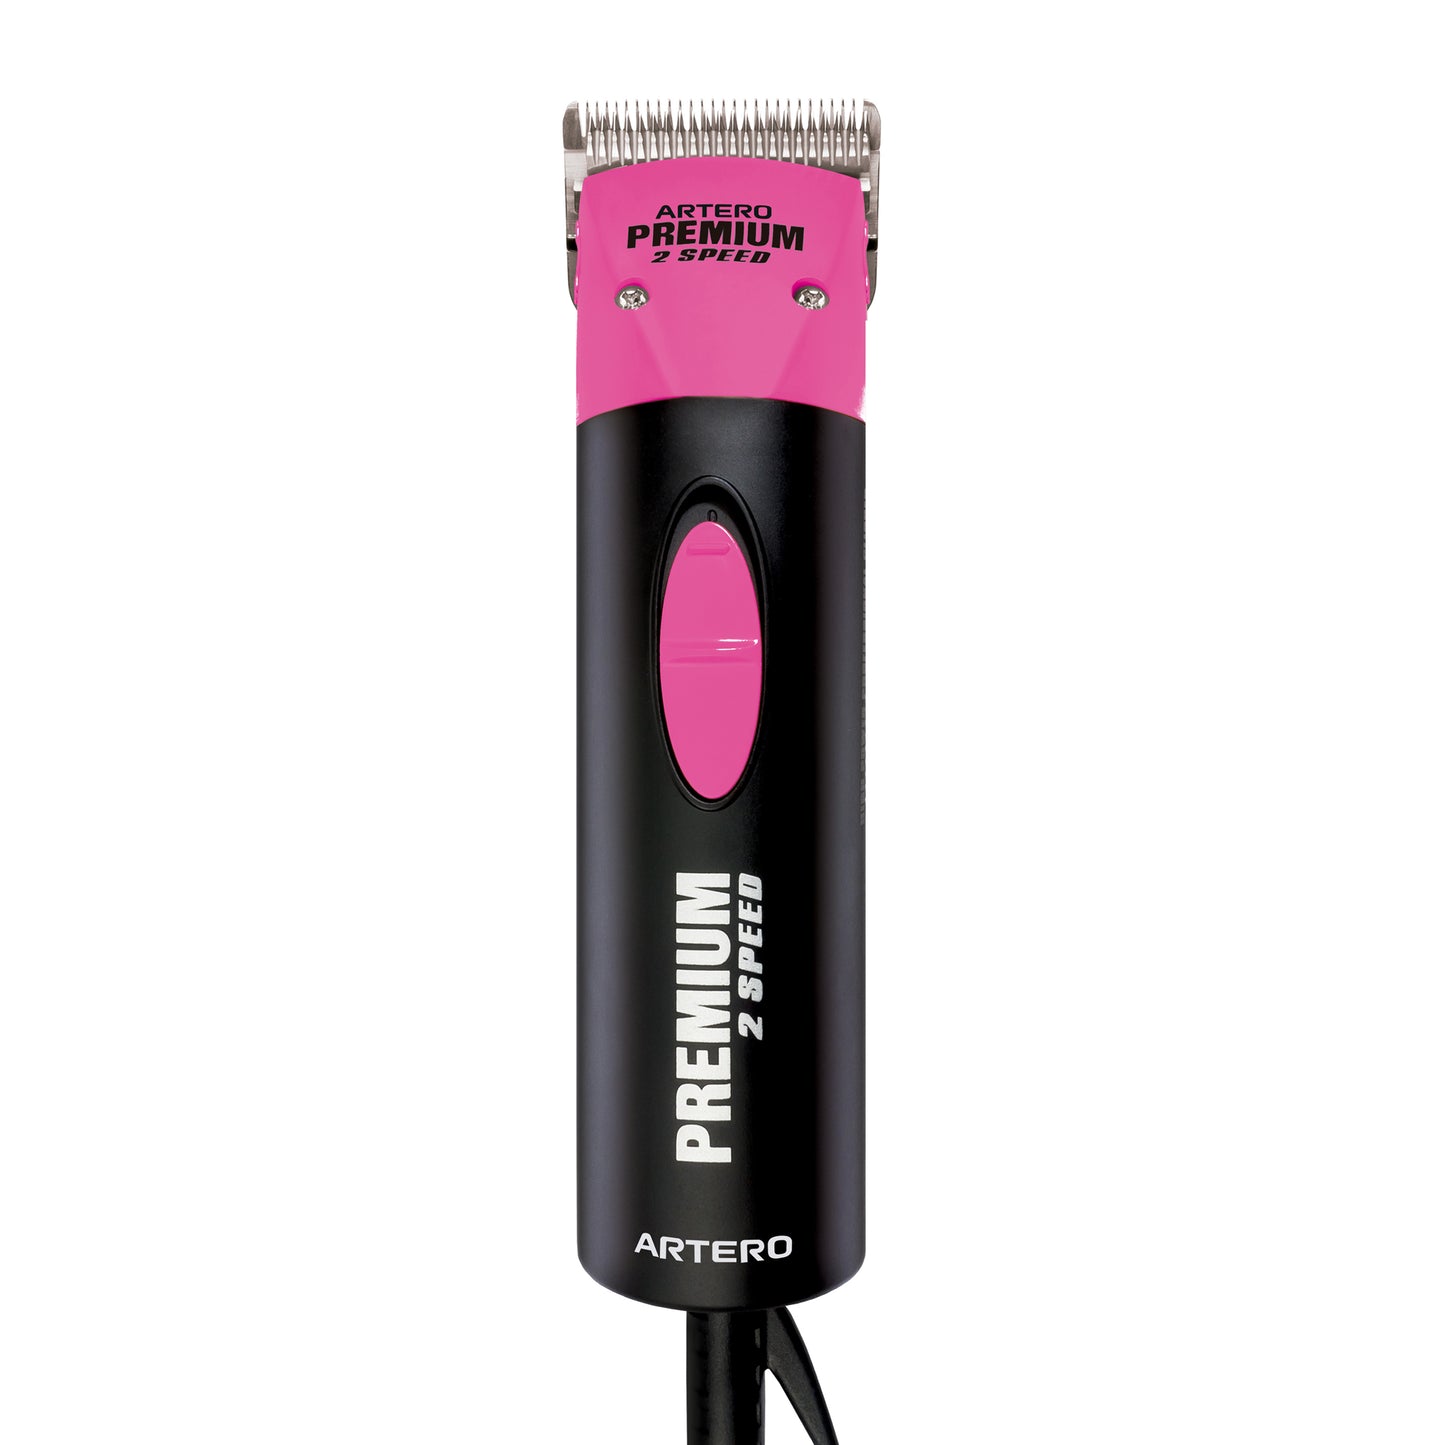 The Artero A5 Premium Professional Pet Grooming Clipper 2 Speed provides reliable, flawless performance. Its two speeds can be switched seamlessly and it's compatible with Andis, Oster, Wahl, Artero, and Geib Blades. This Professional Pet Clipper creates very low noise and vibration and is extremely light weight. Color Pink.